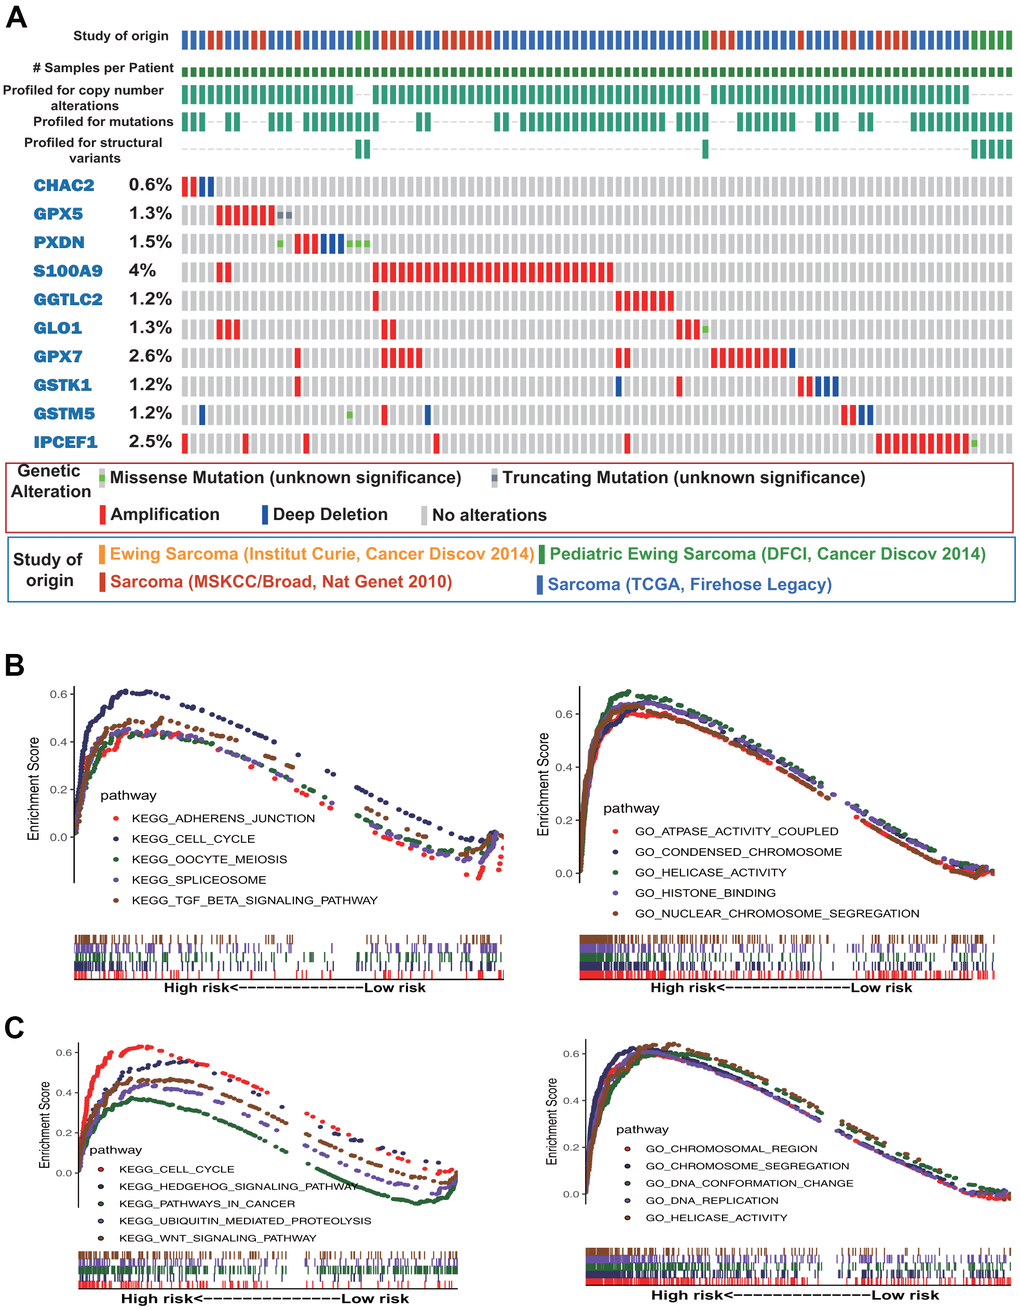 Gene mutation and gene set enrichment analyses. (A) Mutational profiles of the antioxidant genes included in the signature of sarcoma (obtained from cBioPortal). (B) Gene ontology (GO) functional annotation terms and Kyoto Encyclopedia of Genes and Genomes (KEGG) pathways enriched in the OS high-risk group. (C) GO functional annotation terms and KEGG pathways enriched in the DFS high-risk group.